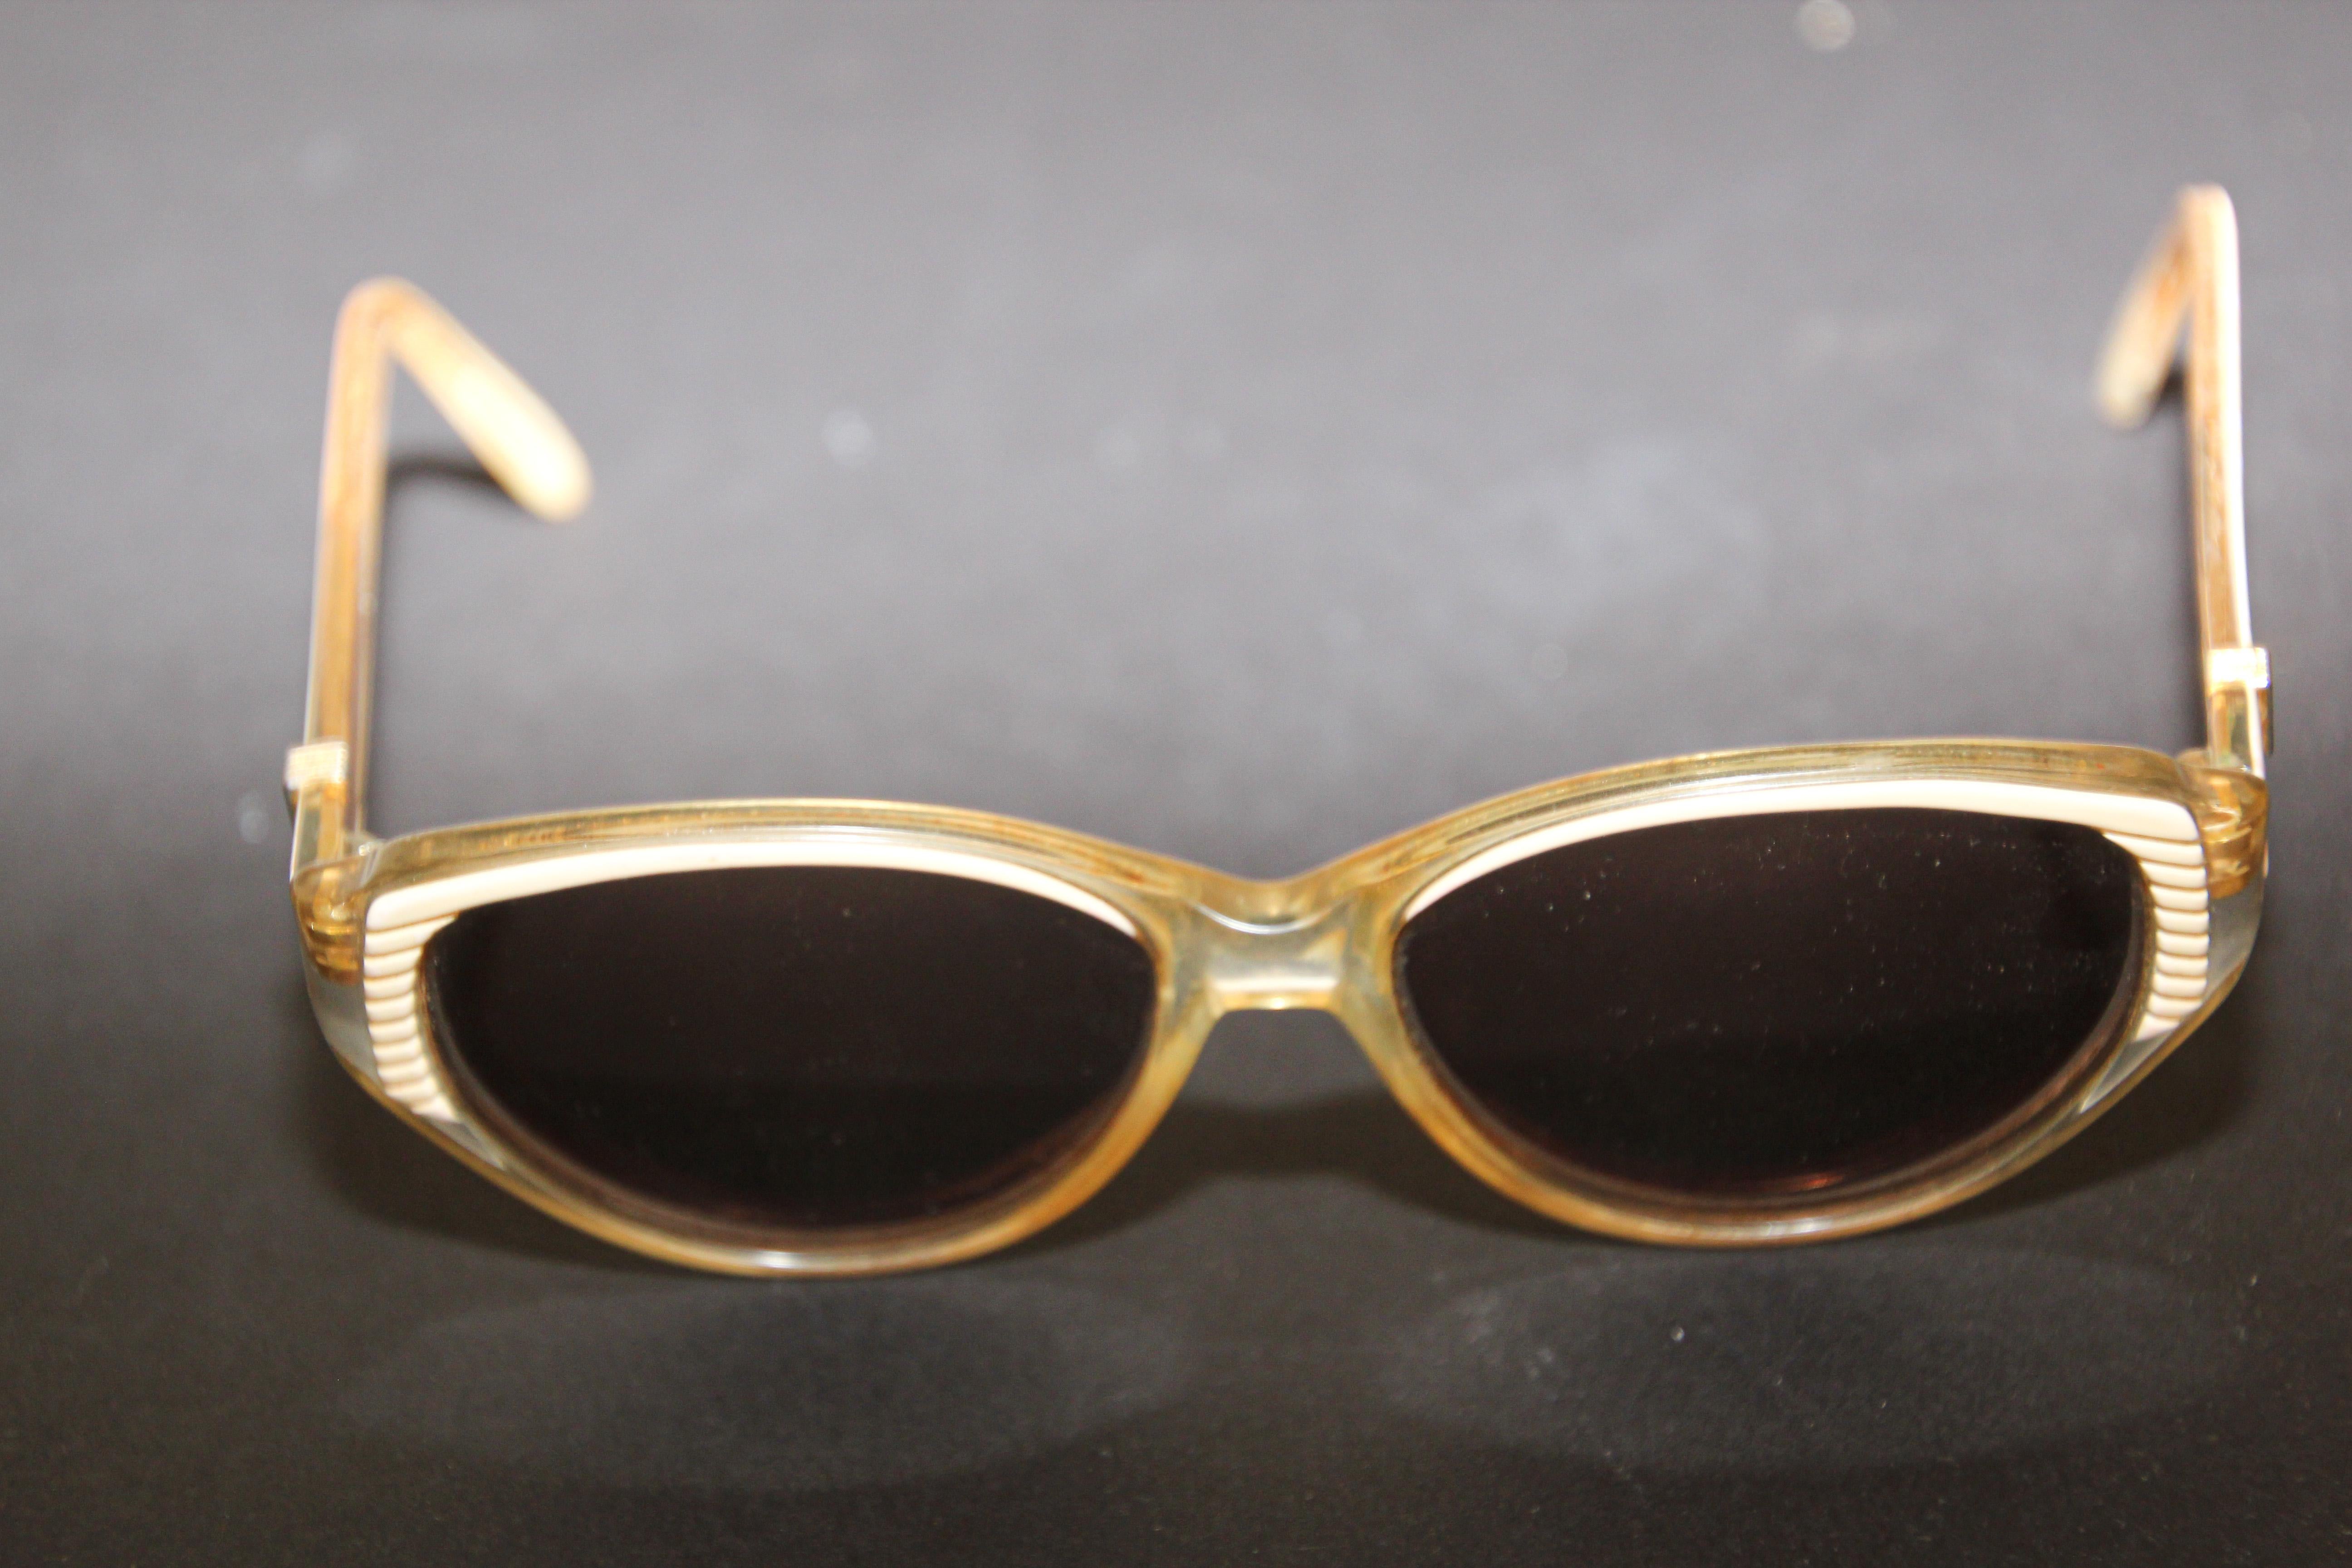 Vintage Yves Saint Laurent Sunglasses In Good Condition For Sale In North Hollywood, CA